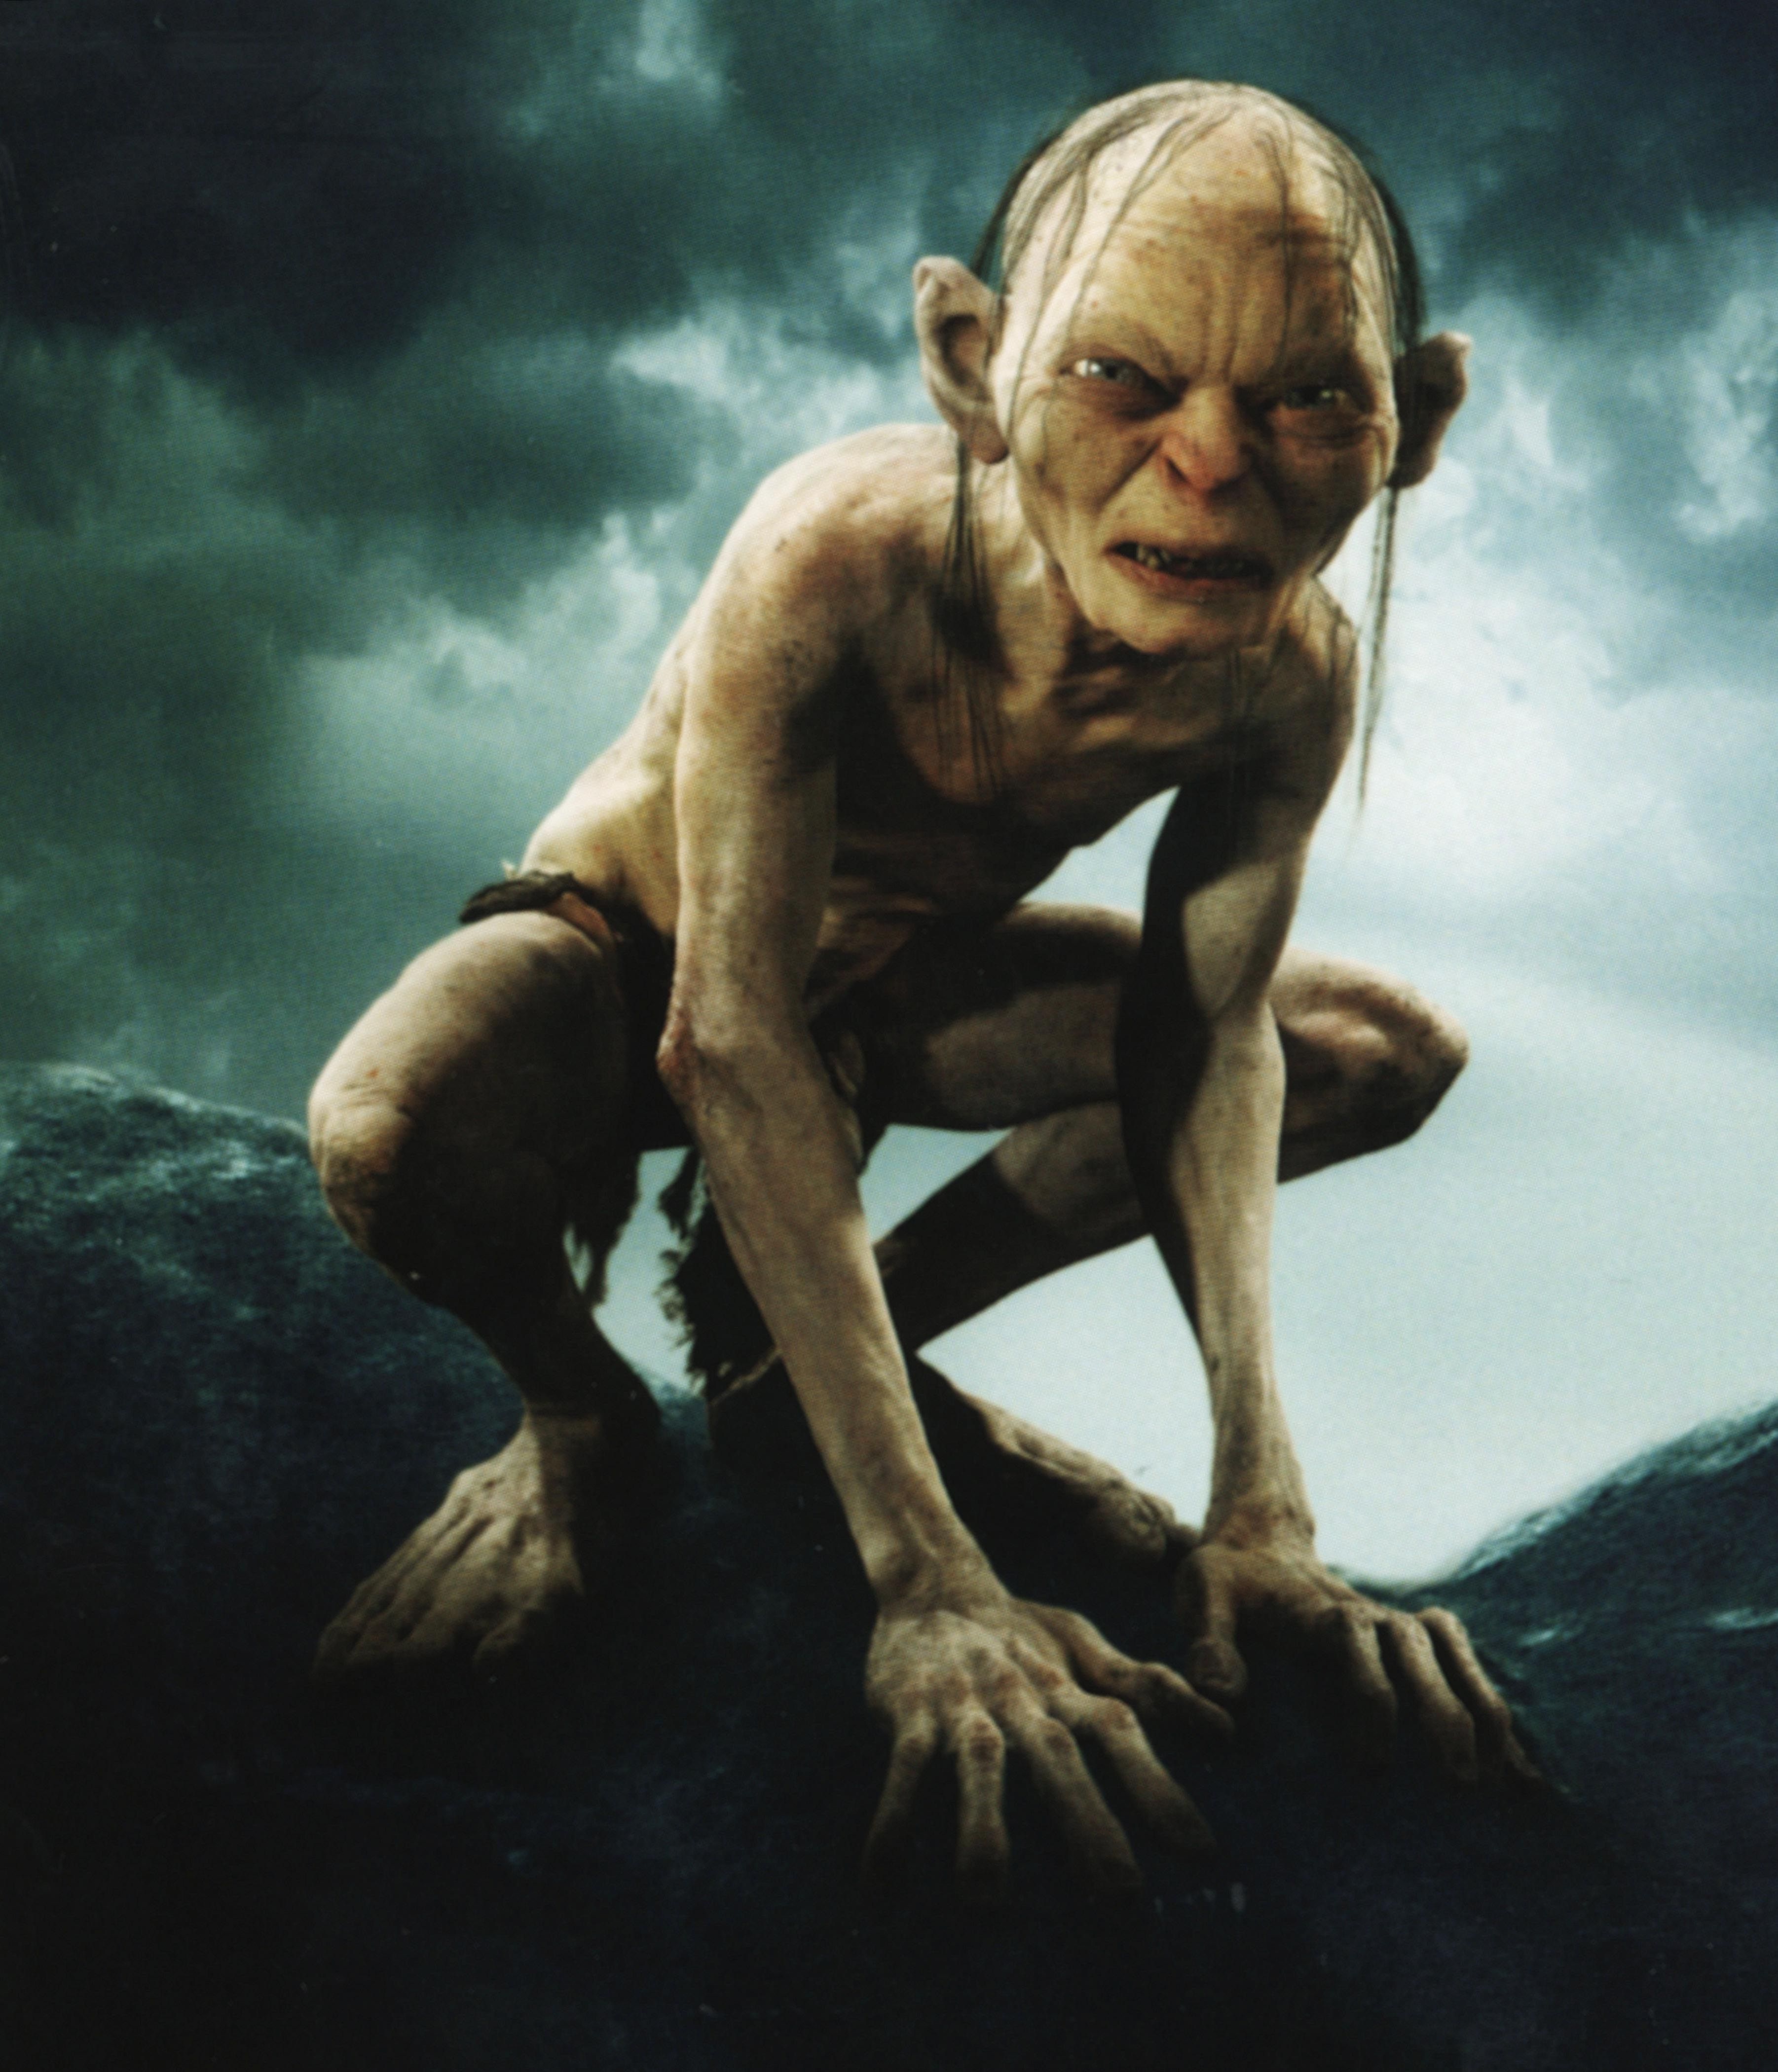 Andy Serkis Reads a Selection From The Hobbit As Gollum [Video]